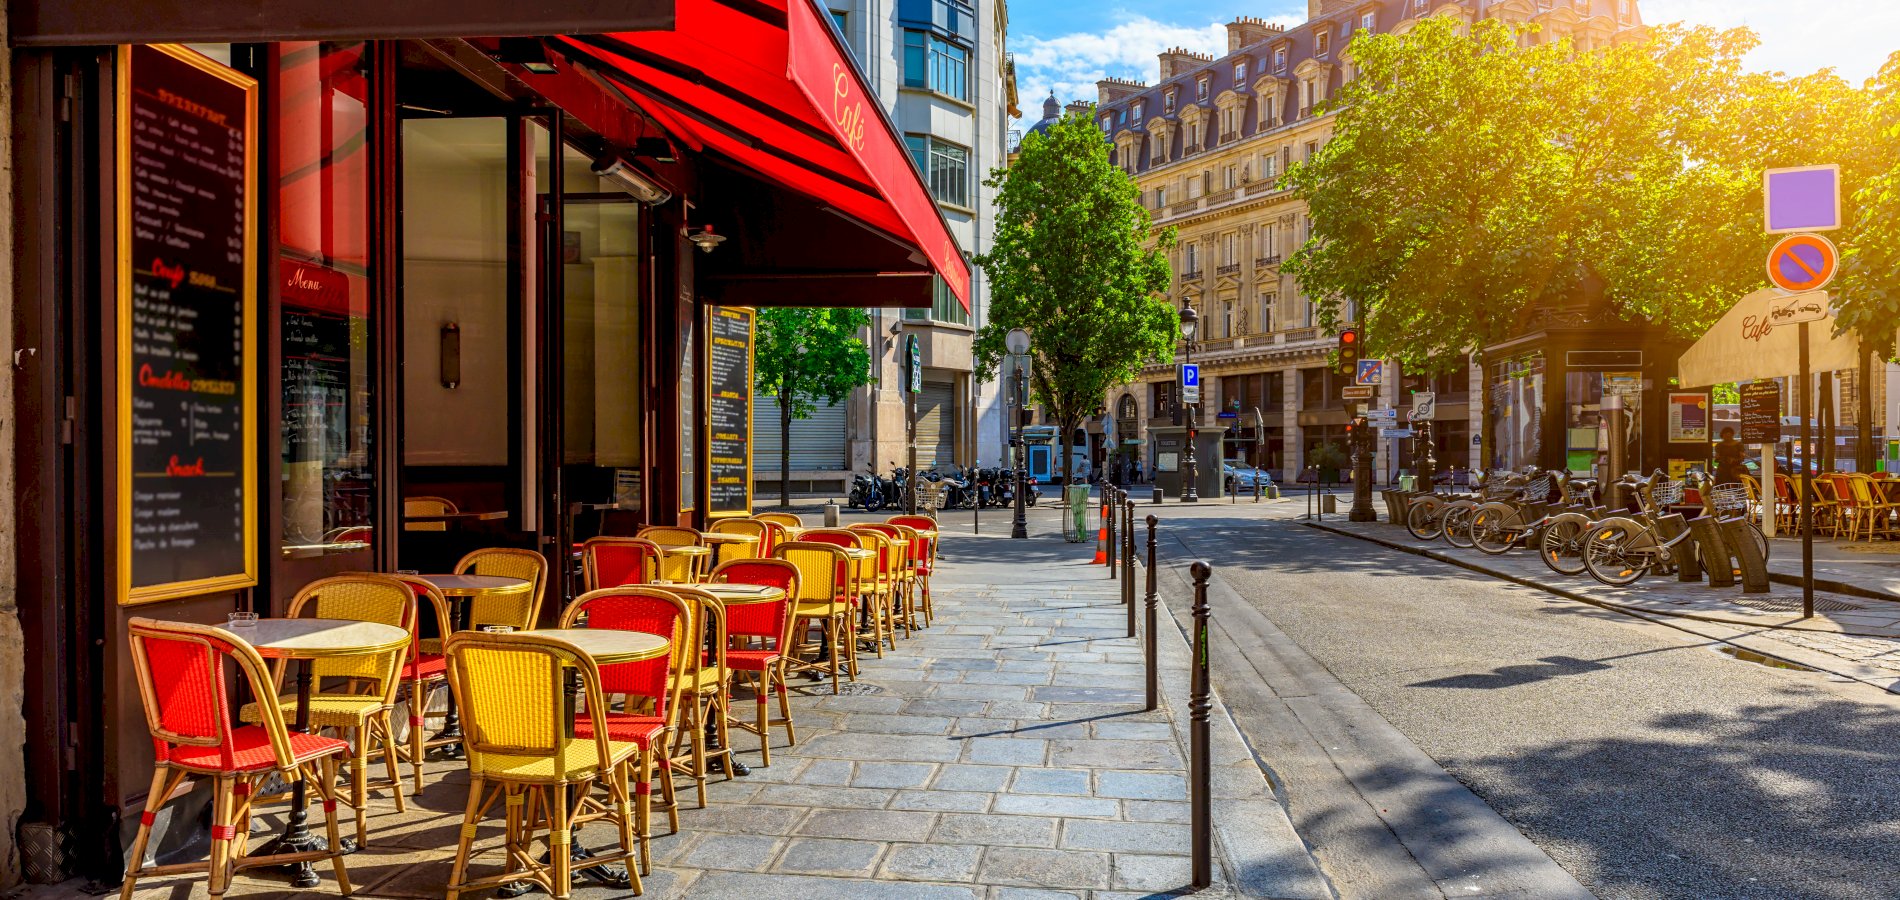 Ophorus Tours - 9 Days Small Group Paris, Normandy & Loire Valley Travel Package - 4* Hotel